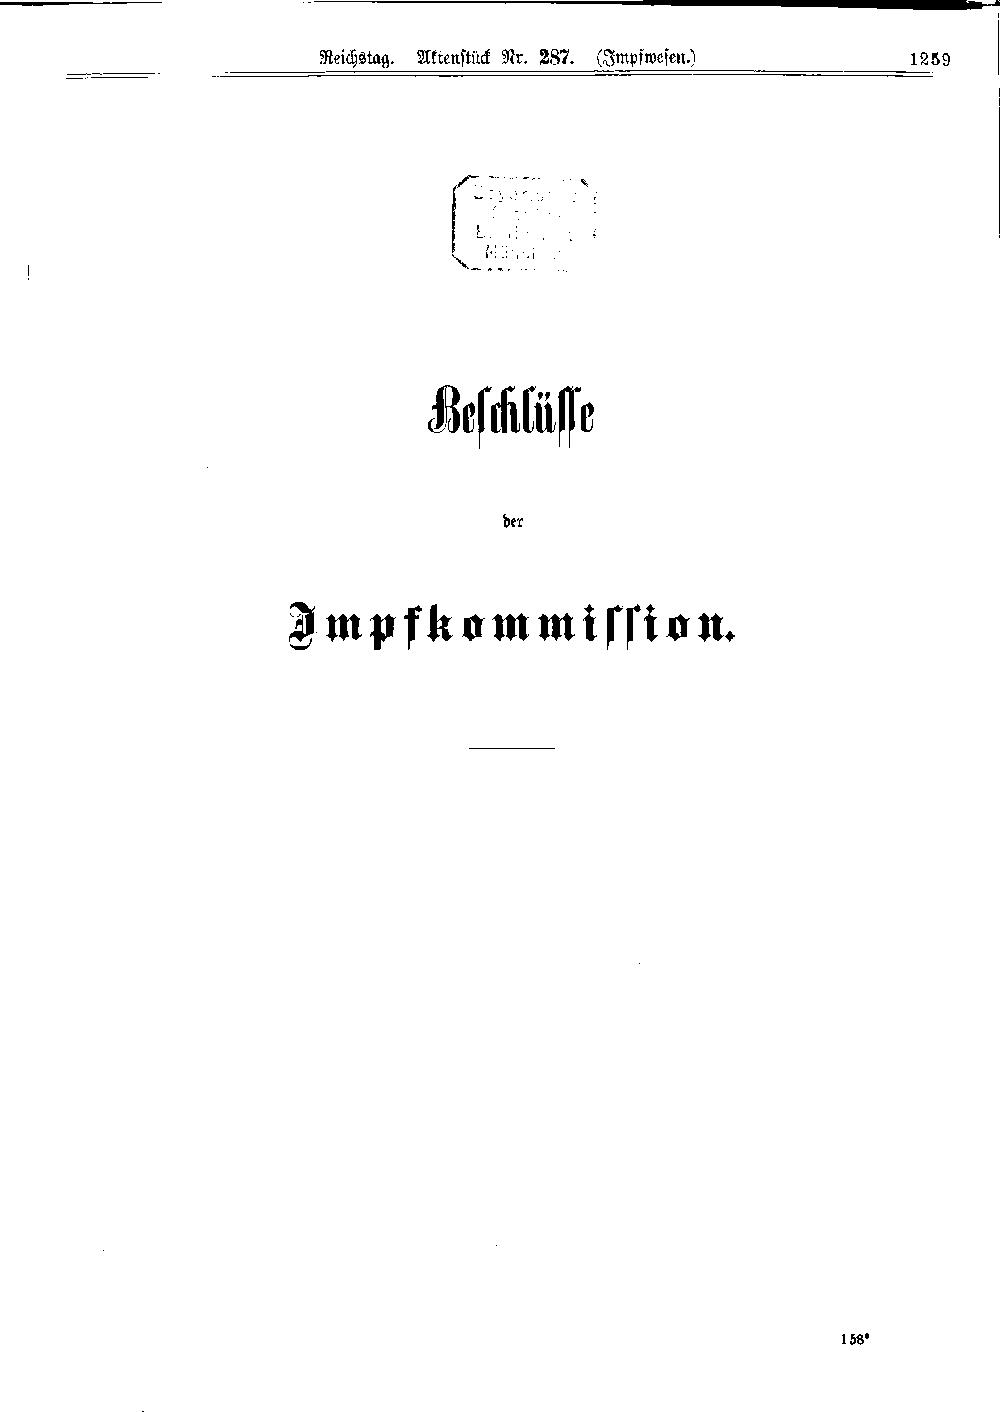 Scan of page 1259